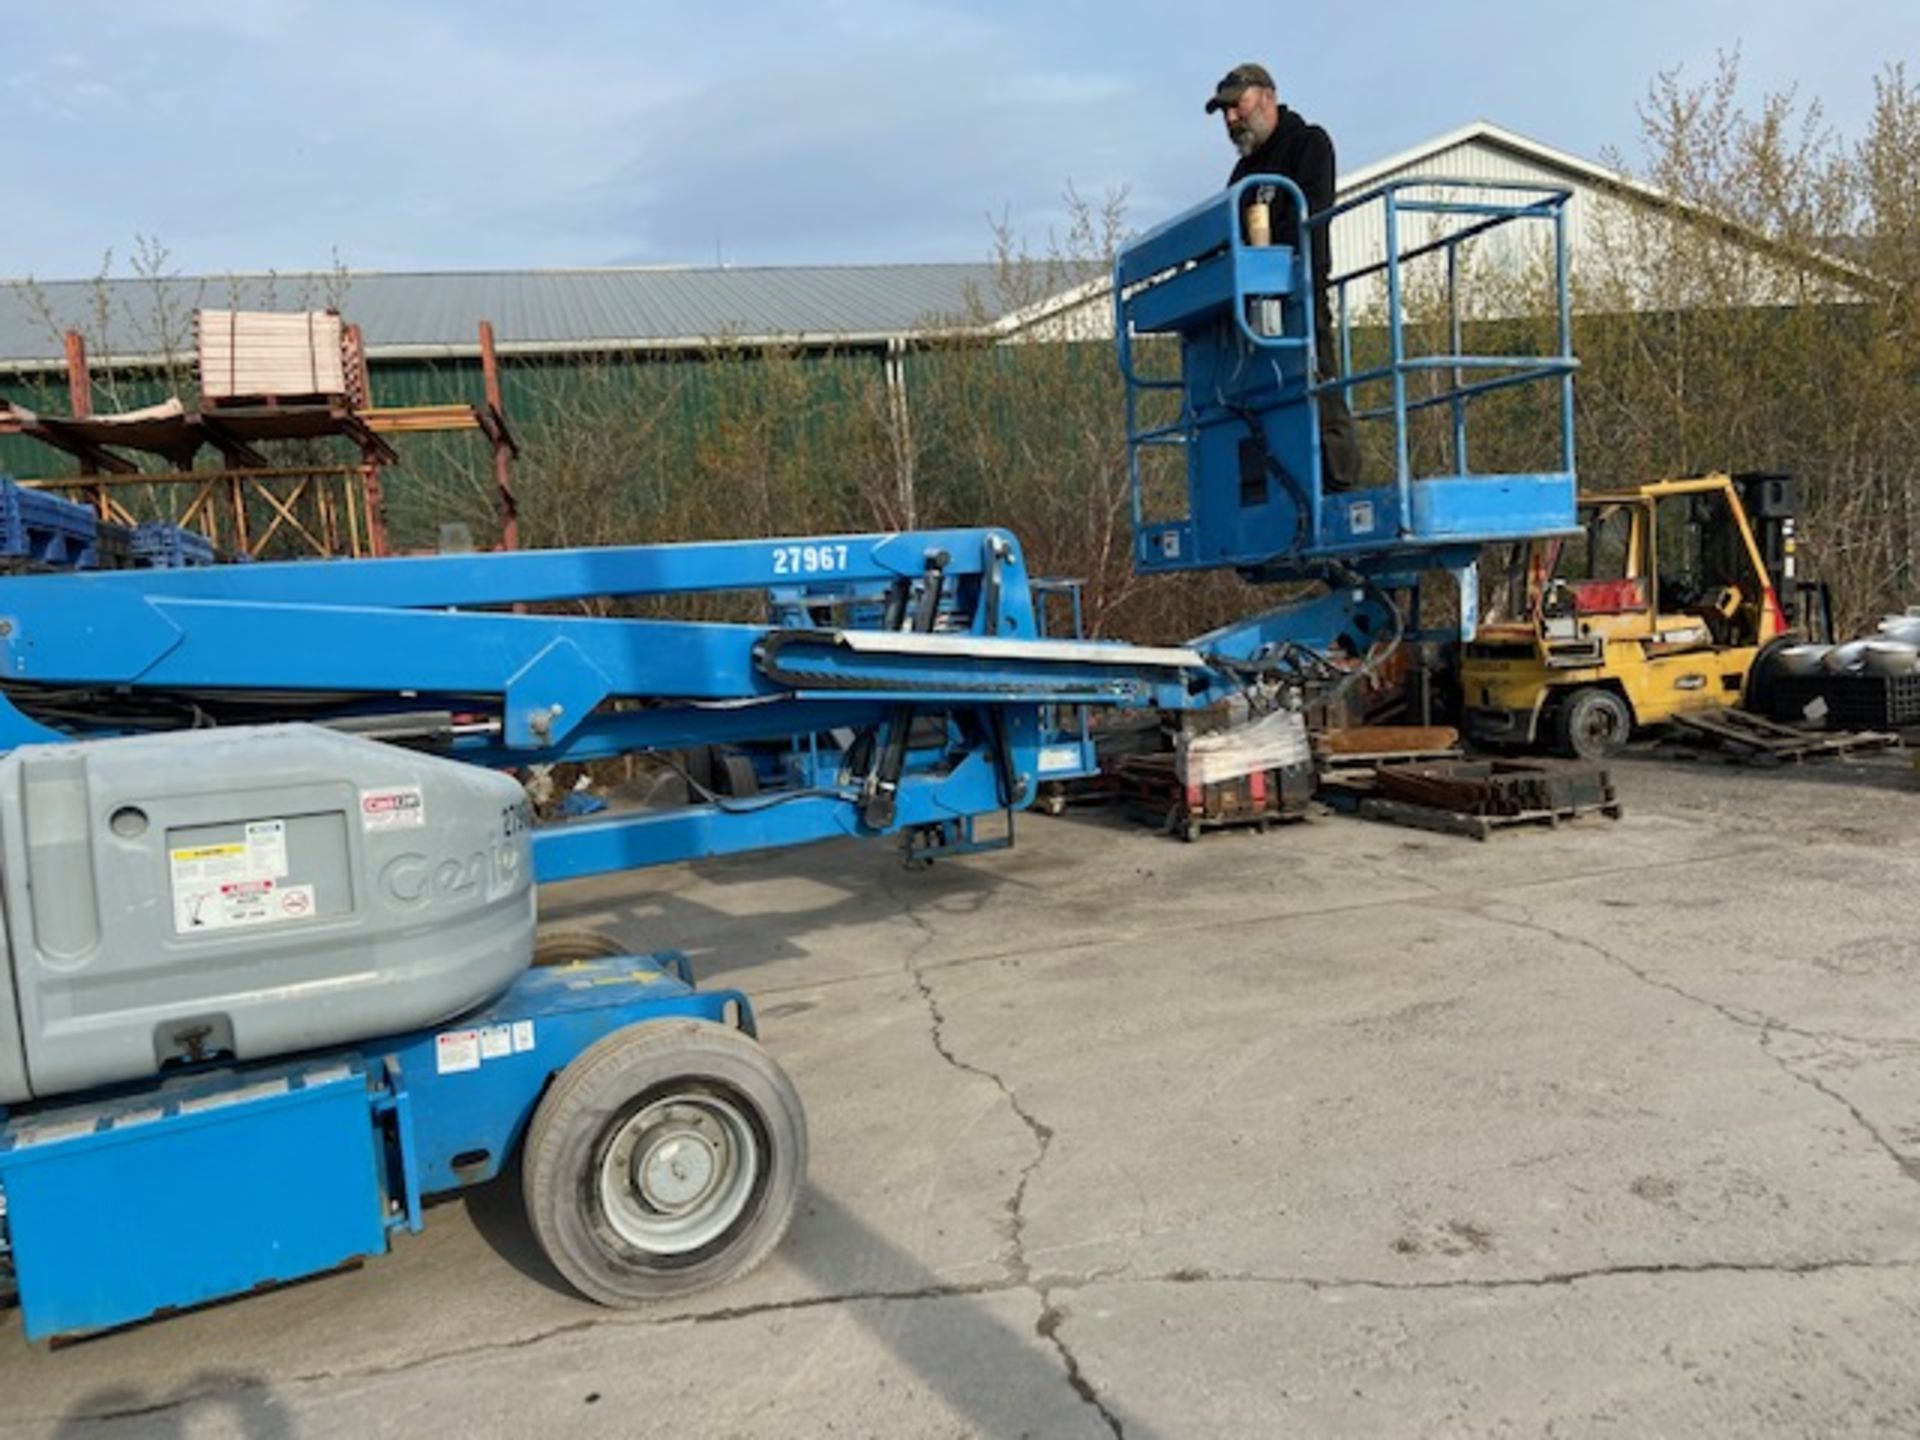 FREE CUSTOMS MINT 2006 Genie Zoom Boom Articulating Lift model Z45/25 45' height Electric LOW HOURS - Image 6 of 6